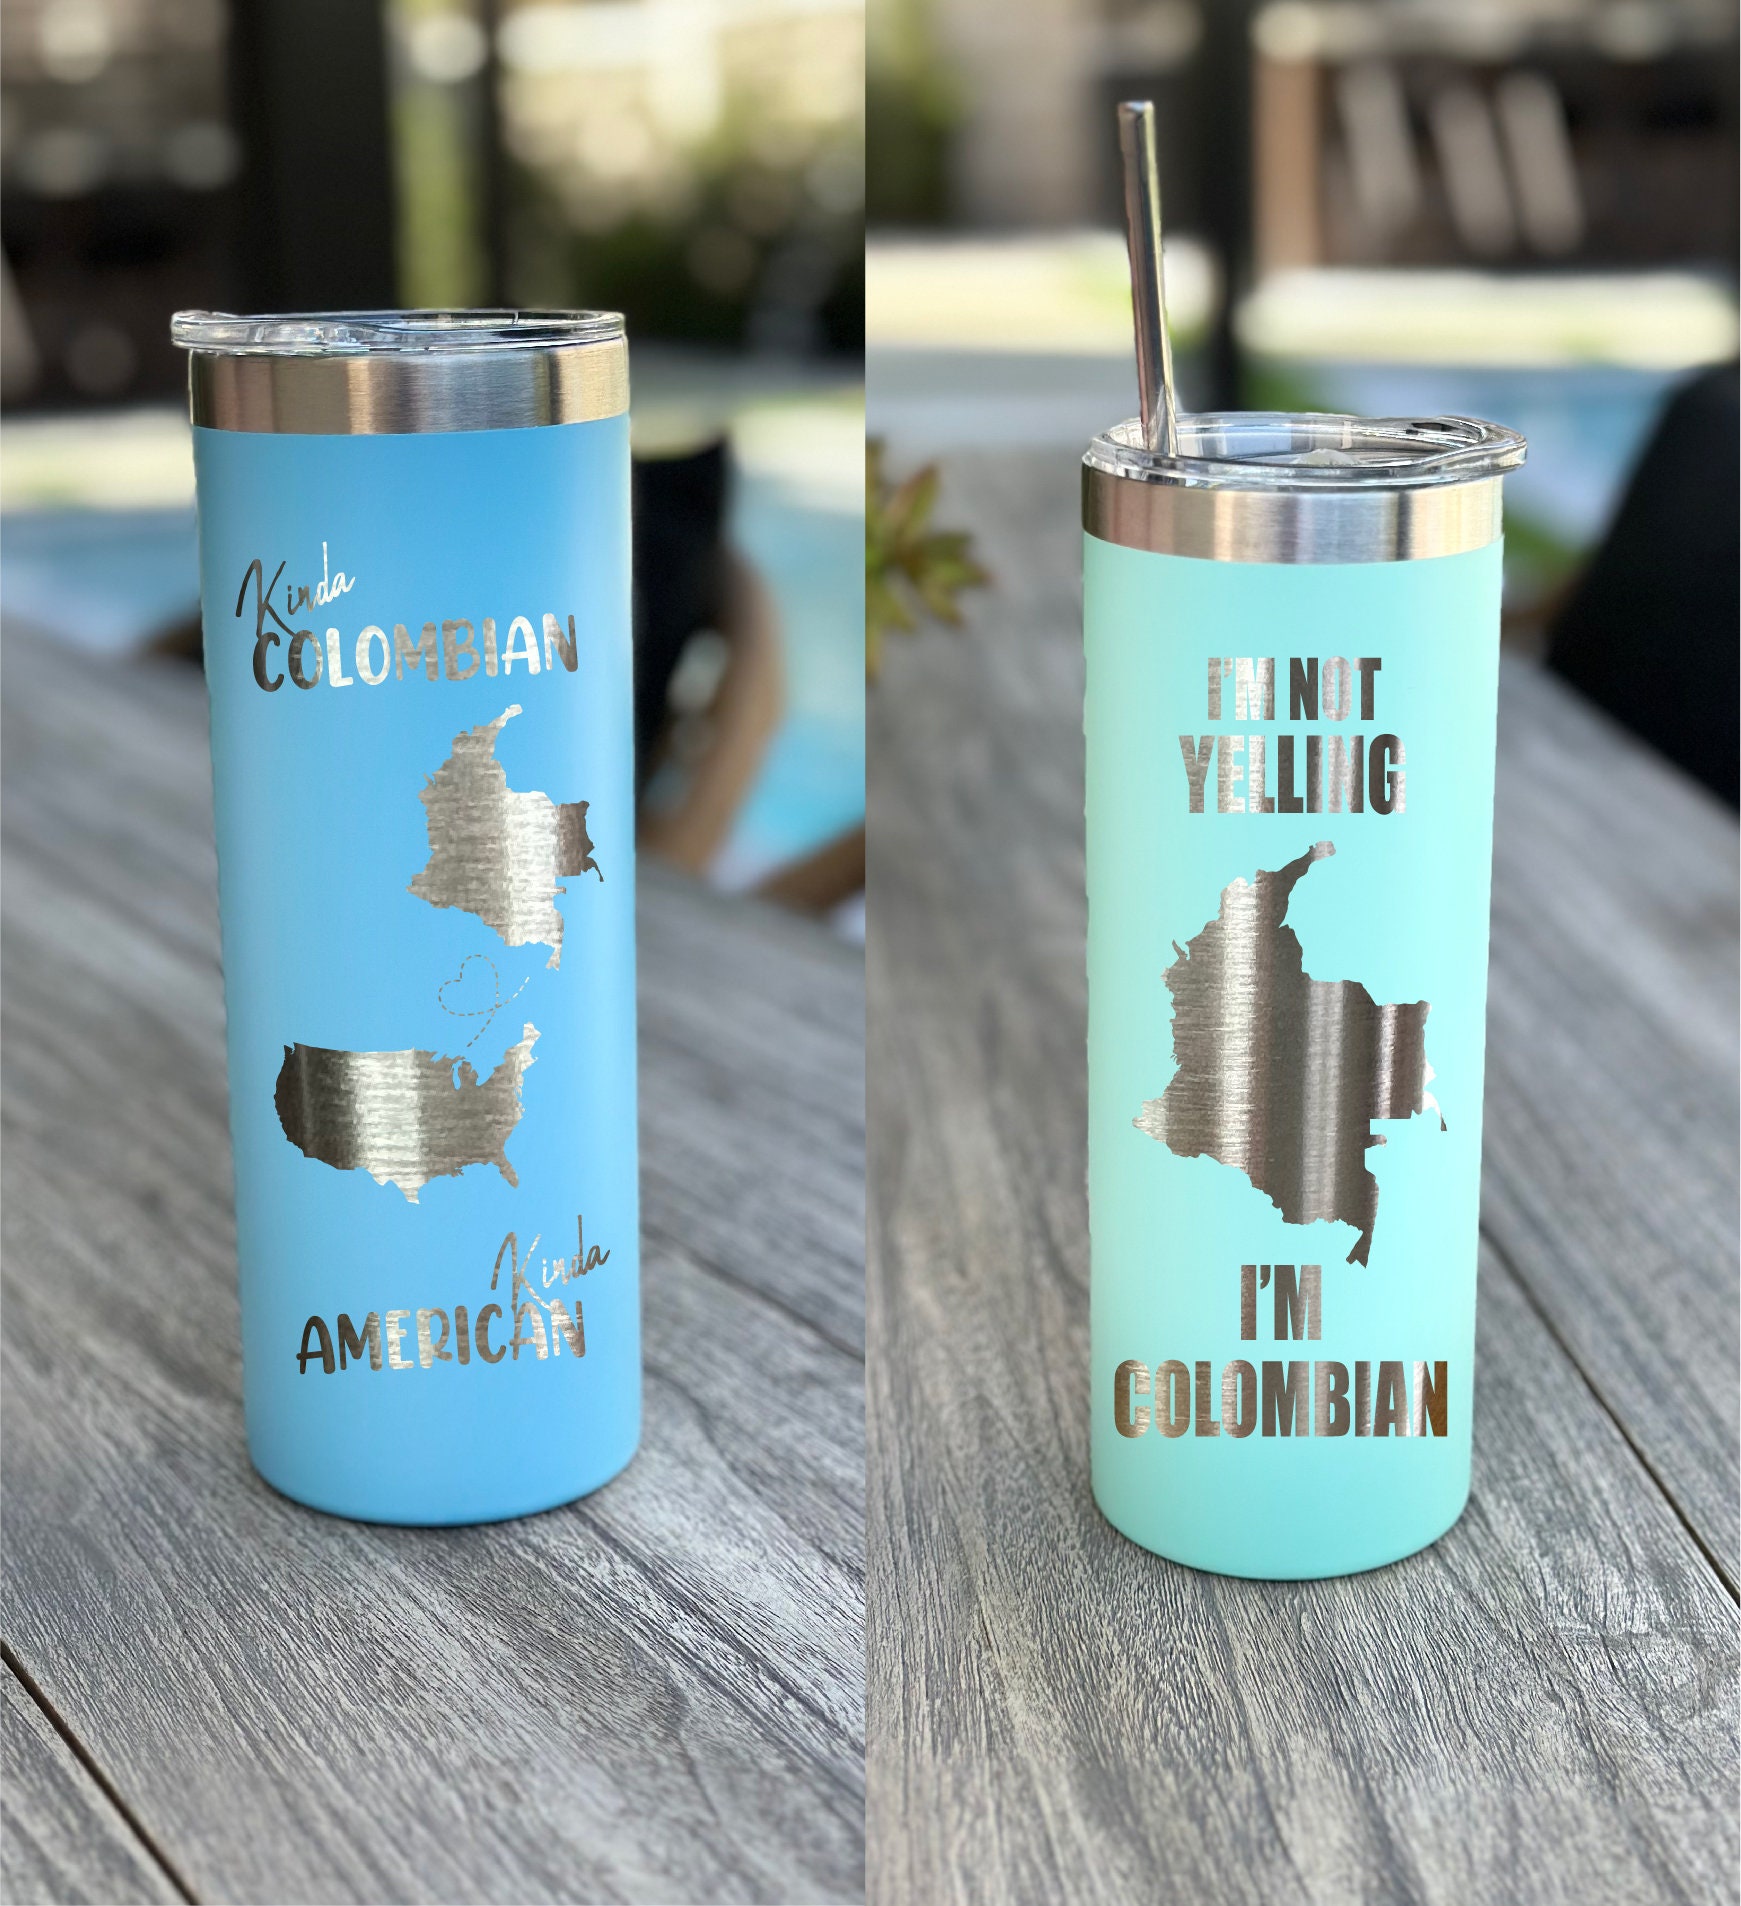 YETI Tumblers for sale in Cartagena, Colombia